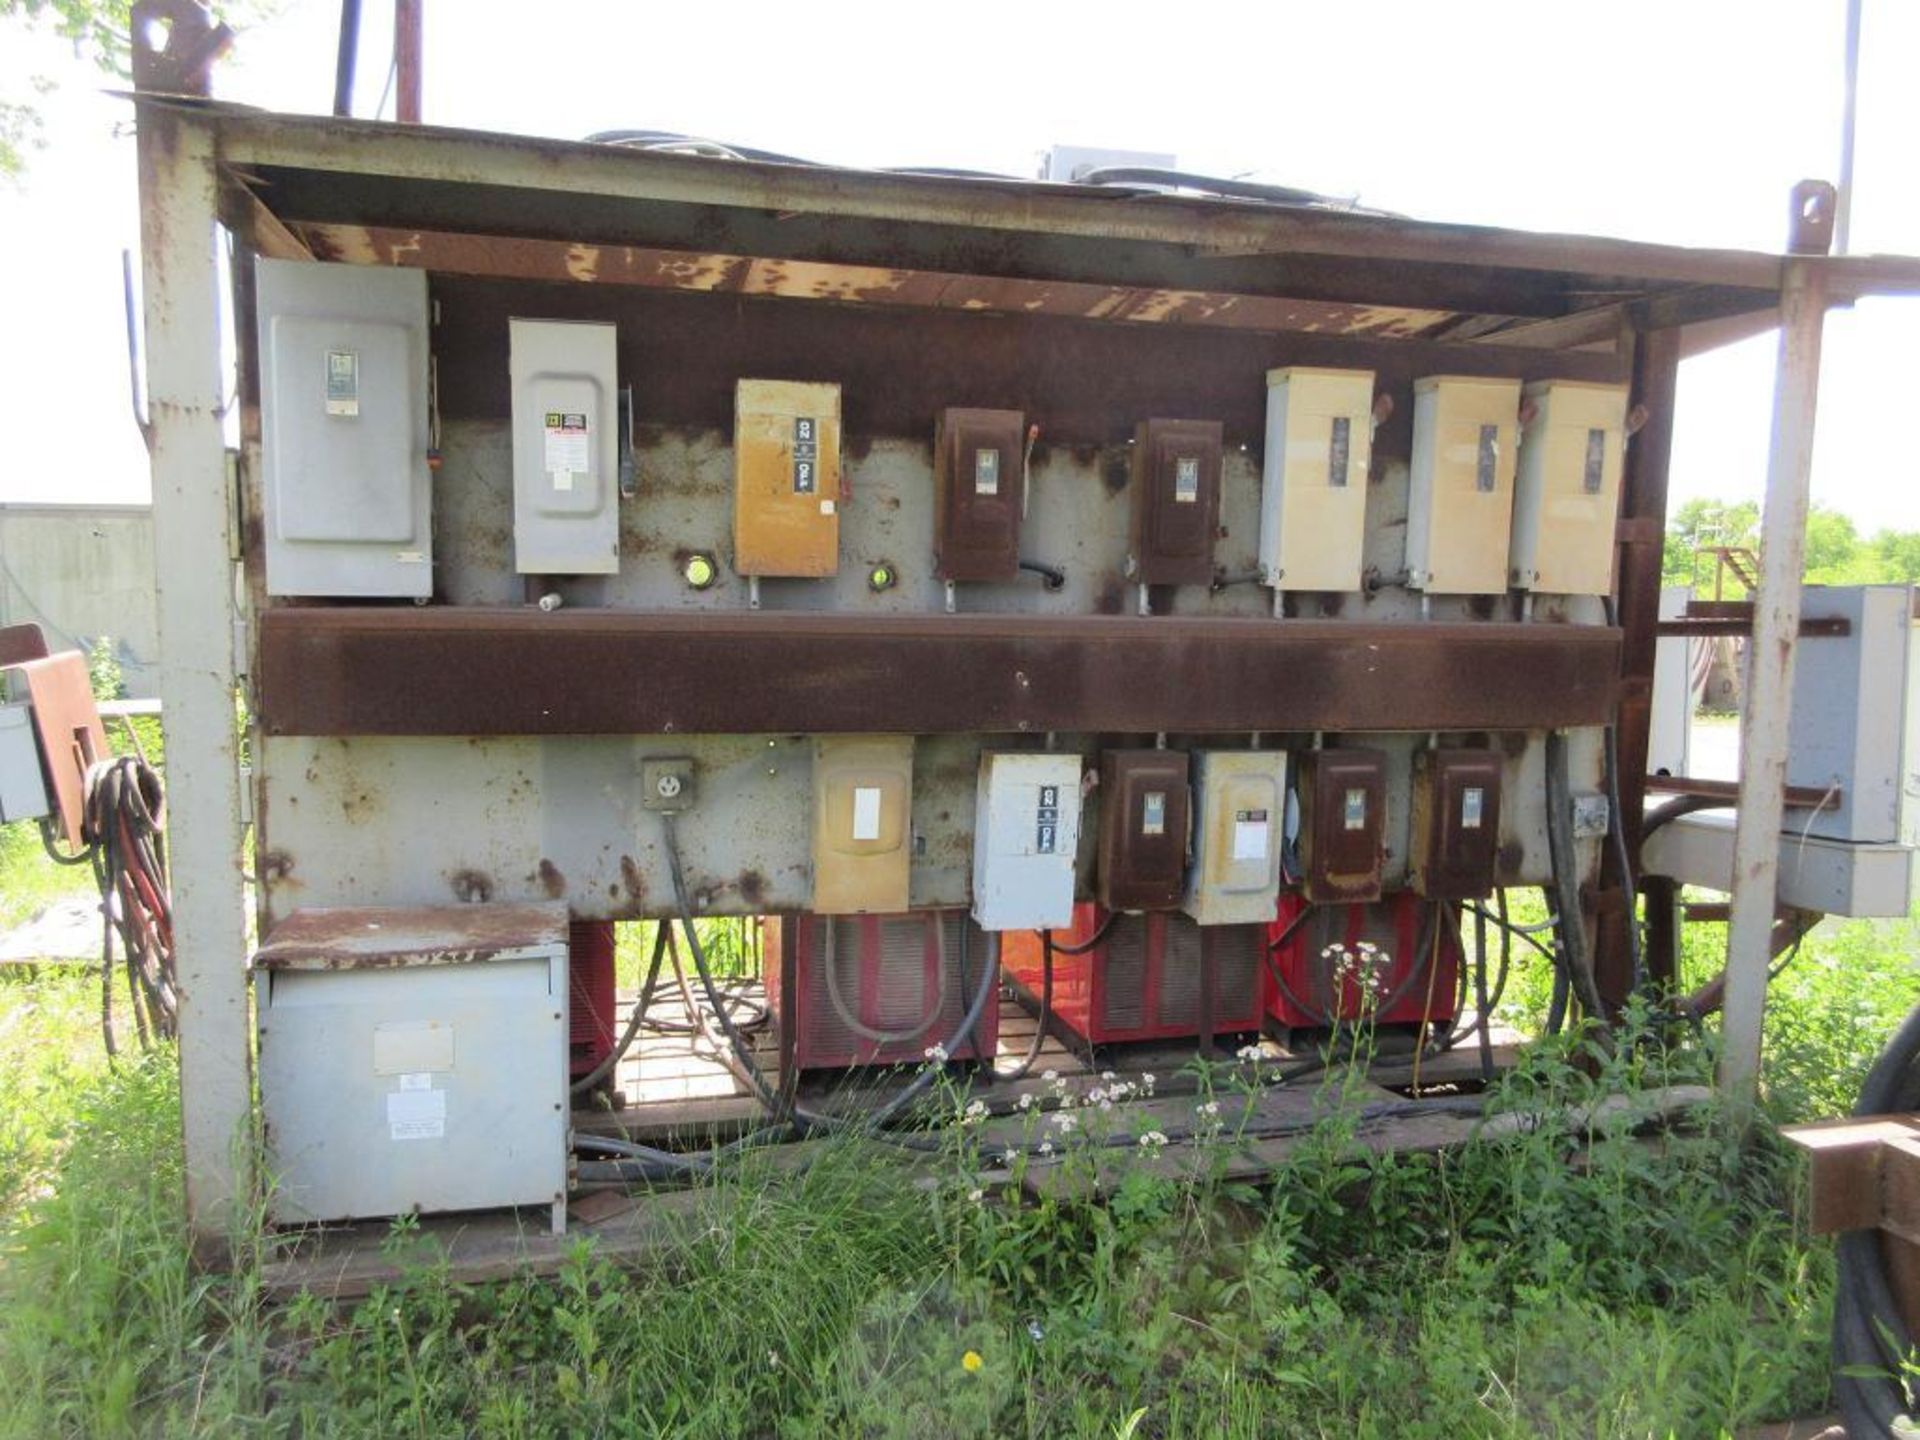 WELDING BANK CANOPY, 14 SAFETY SWITCHES, SQUARE D 45 KVA TRANSFORMER, (MAIN DISCONNECT NOT INCLUDED) - Image 2 of 2